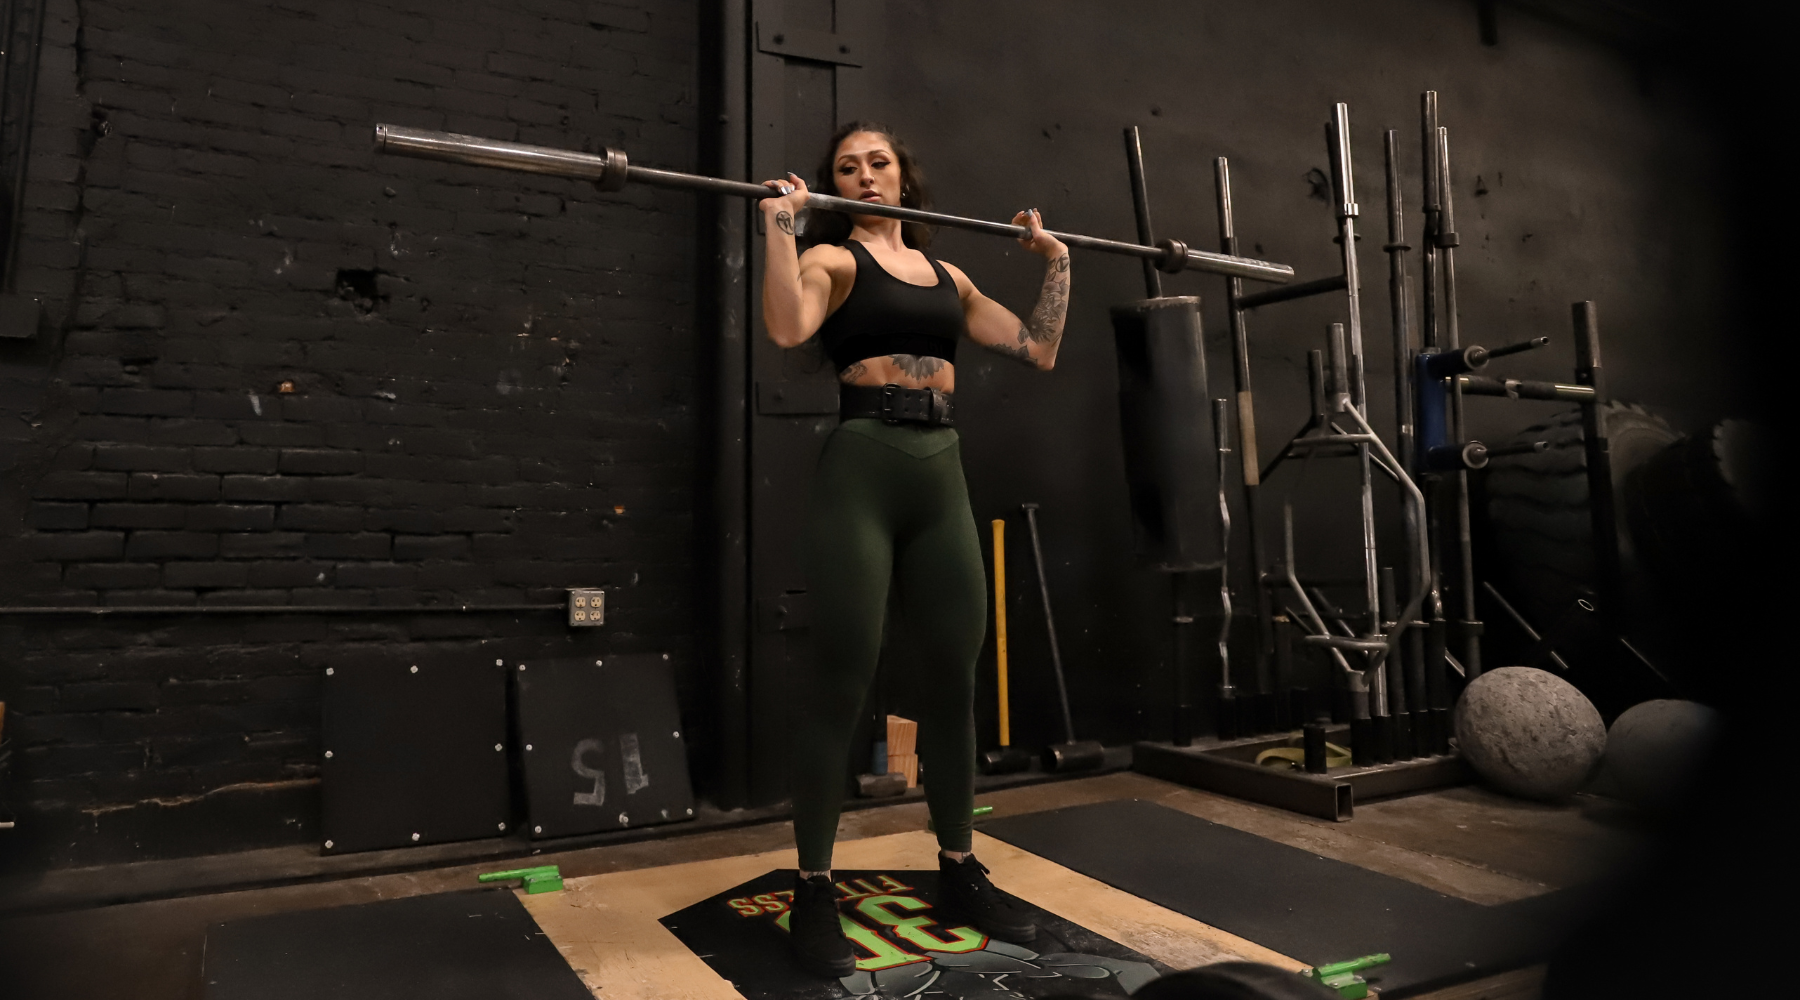 Weightlifting belt: what does it do plus when and how you should wear it